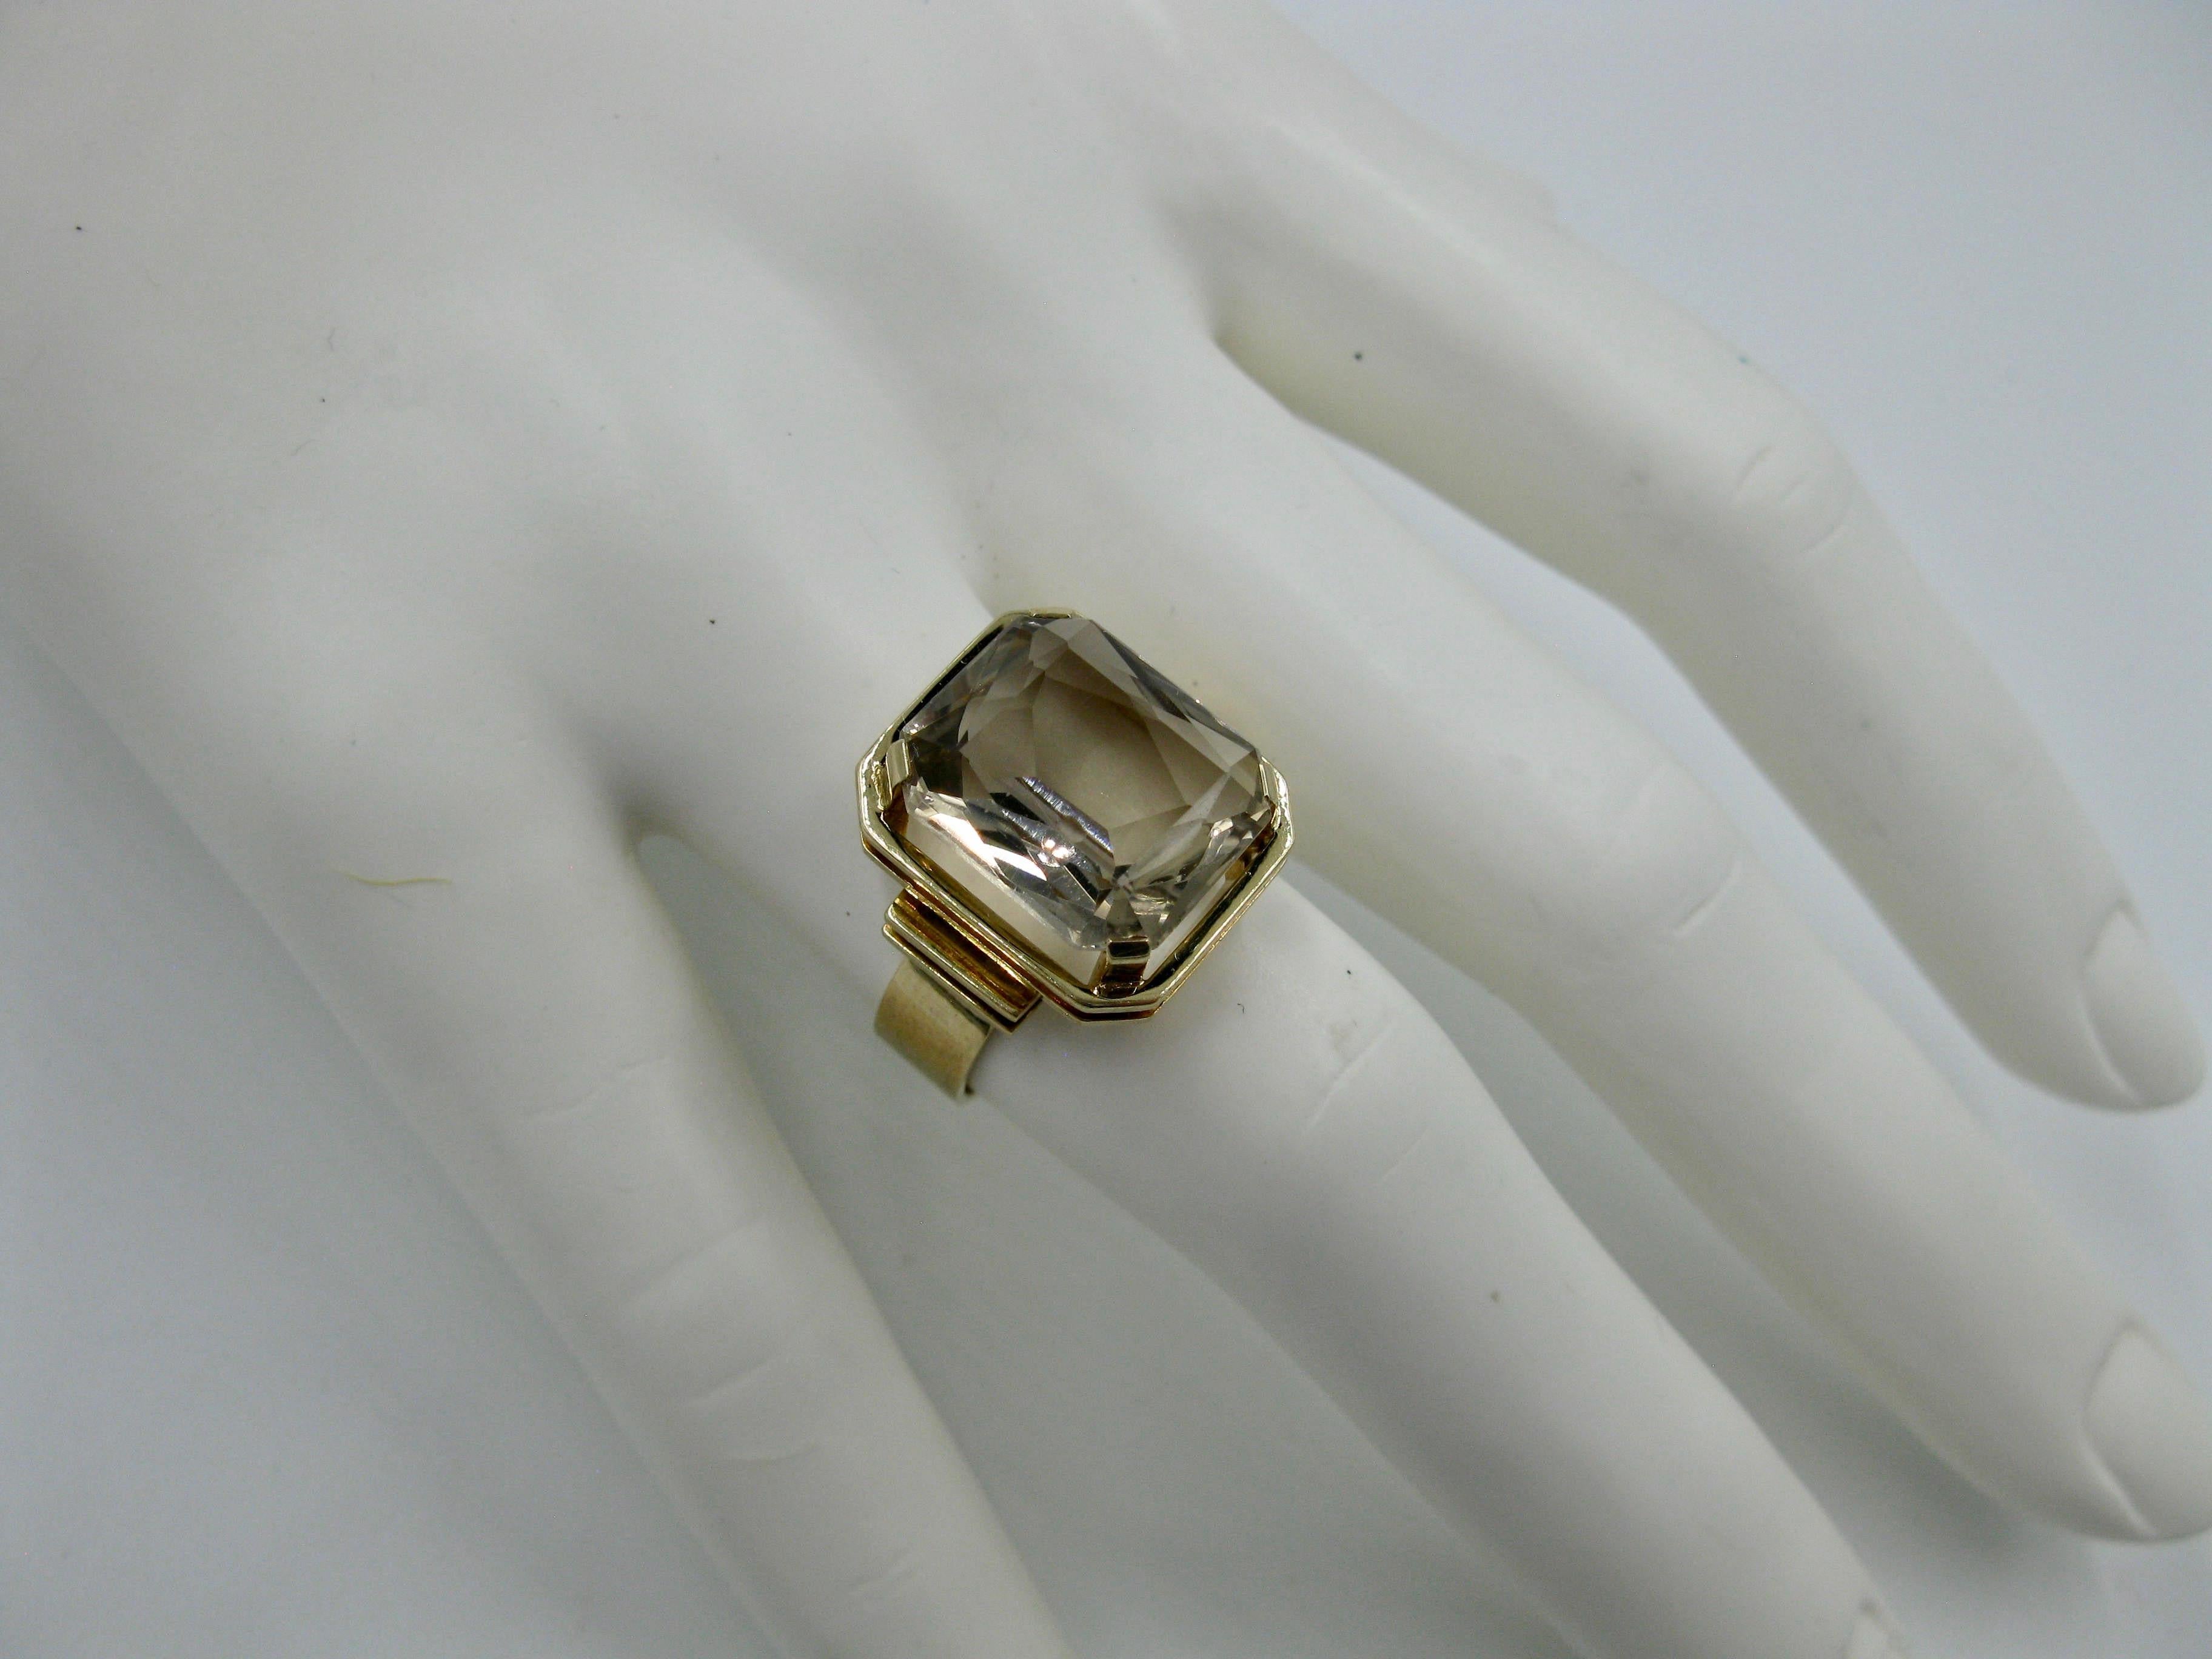 The stunning emerald cut Citrine 14 Karat Gold mid-century modern ring was made in Finland in 1960. A ring created by the esteemed Finnish Jewelry designers from the Mid Century Modern period in Scandinavia. The beautiful Citrine is emerald cut and